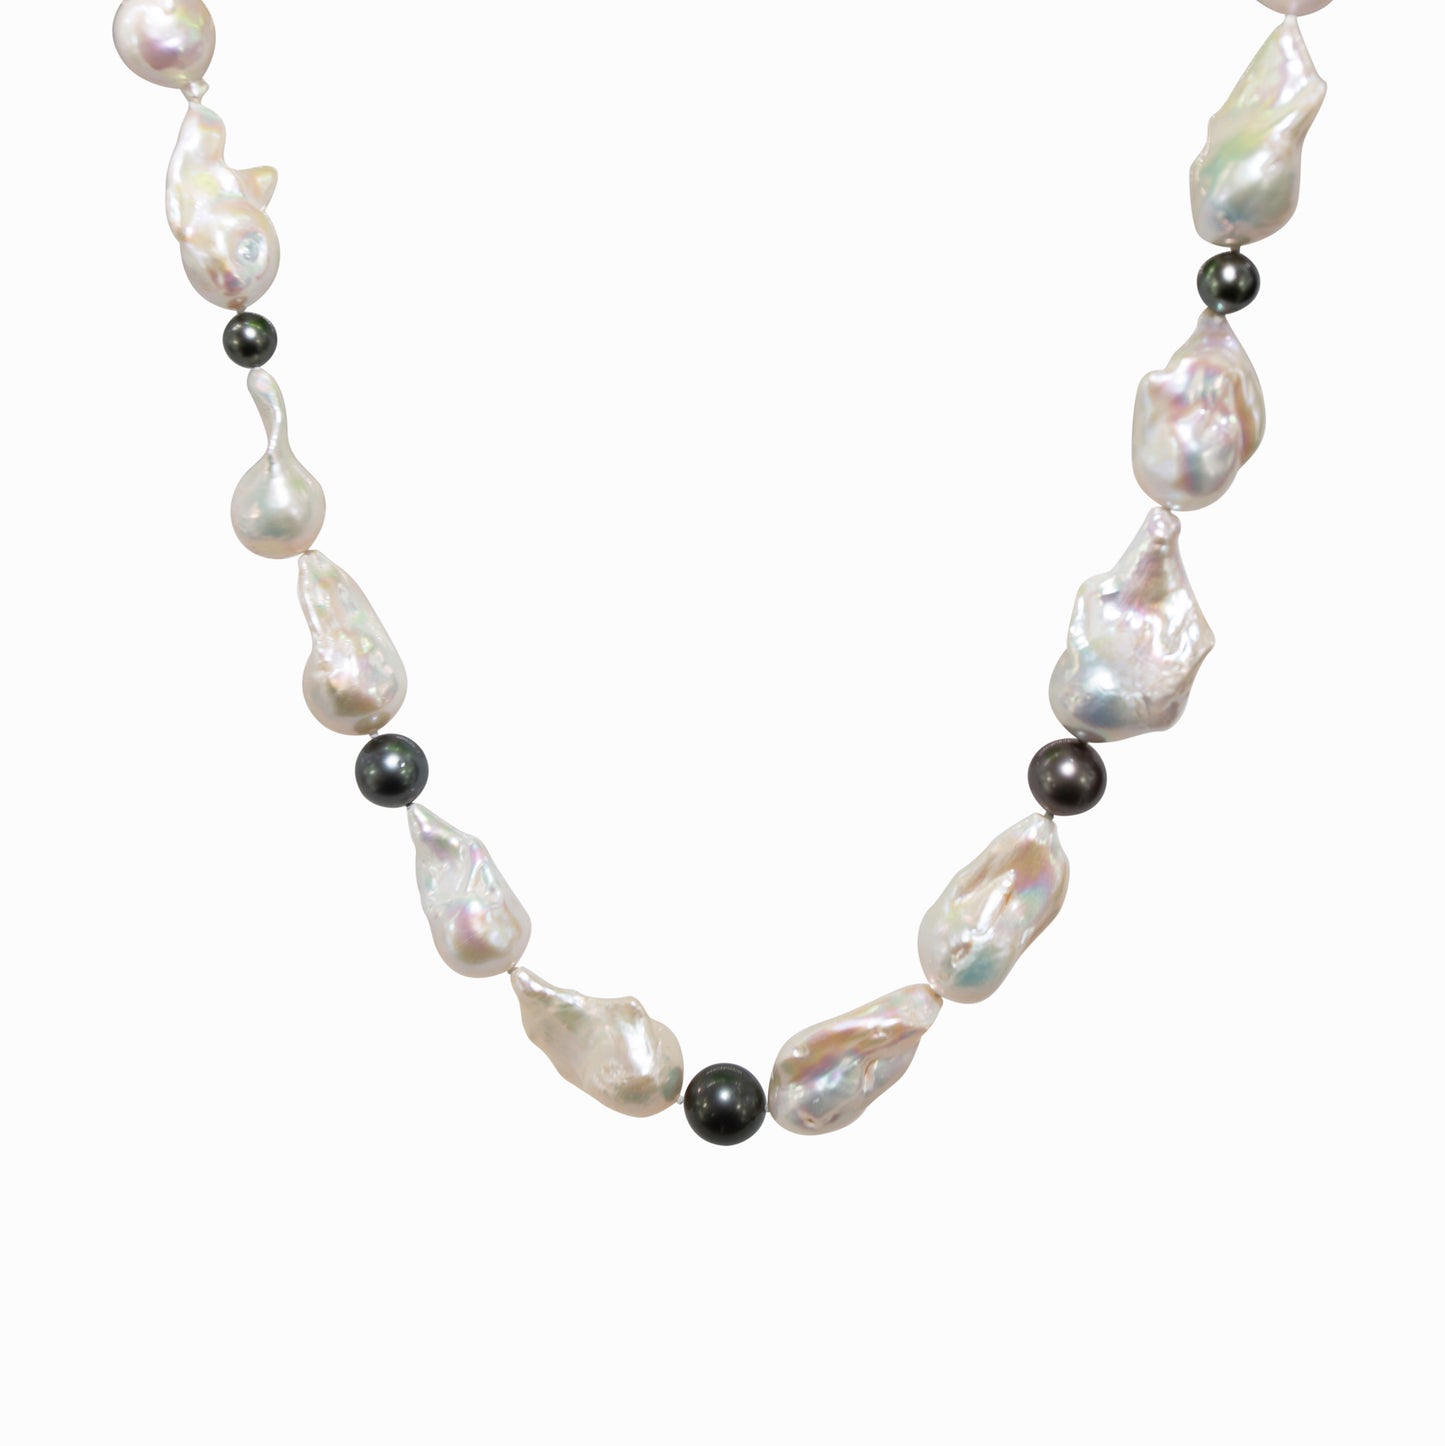 19-inch Sculpted Baroque Pearl Strand